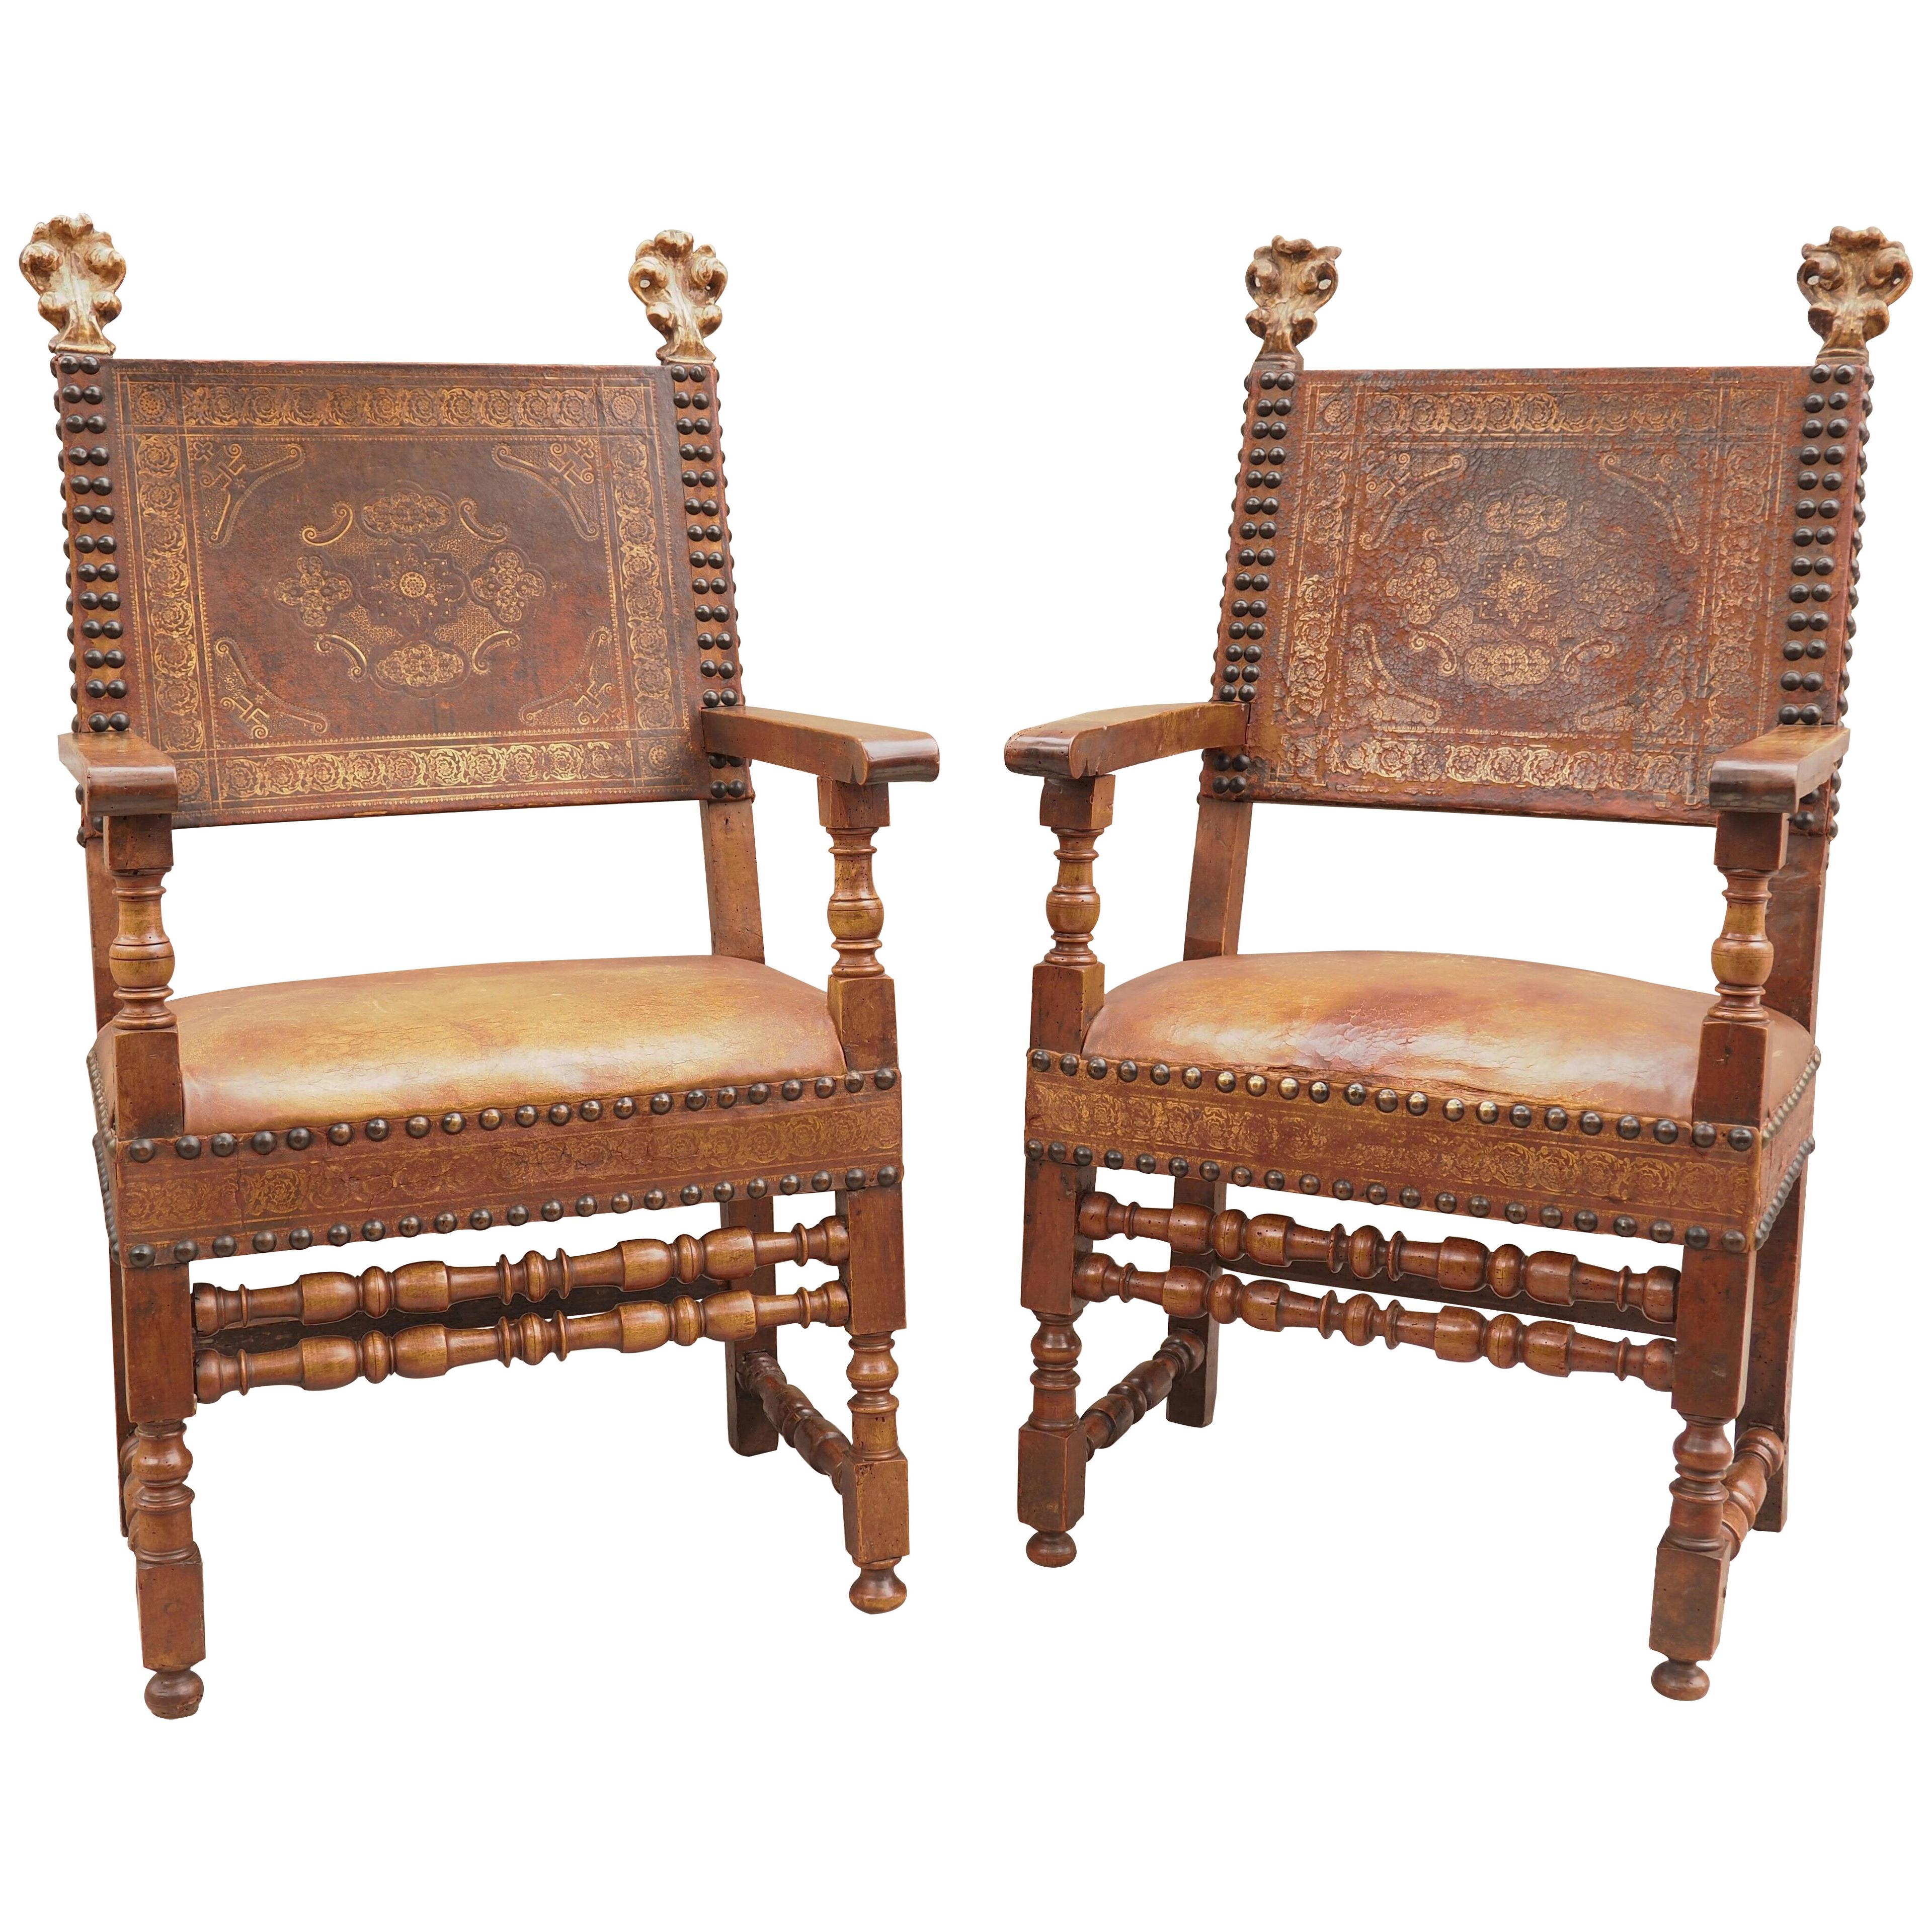 Pair of 17th Century Tooled and Gilt Leather and Walnut Armchairs from Italy